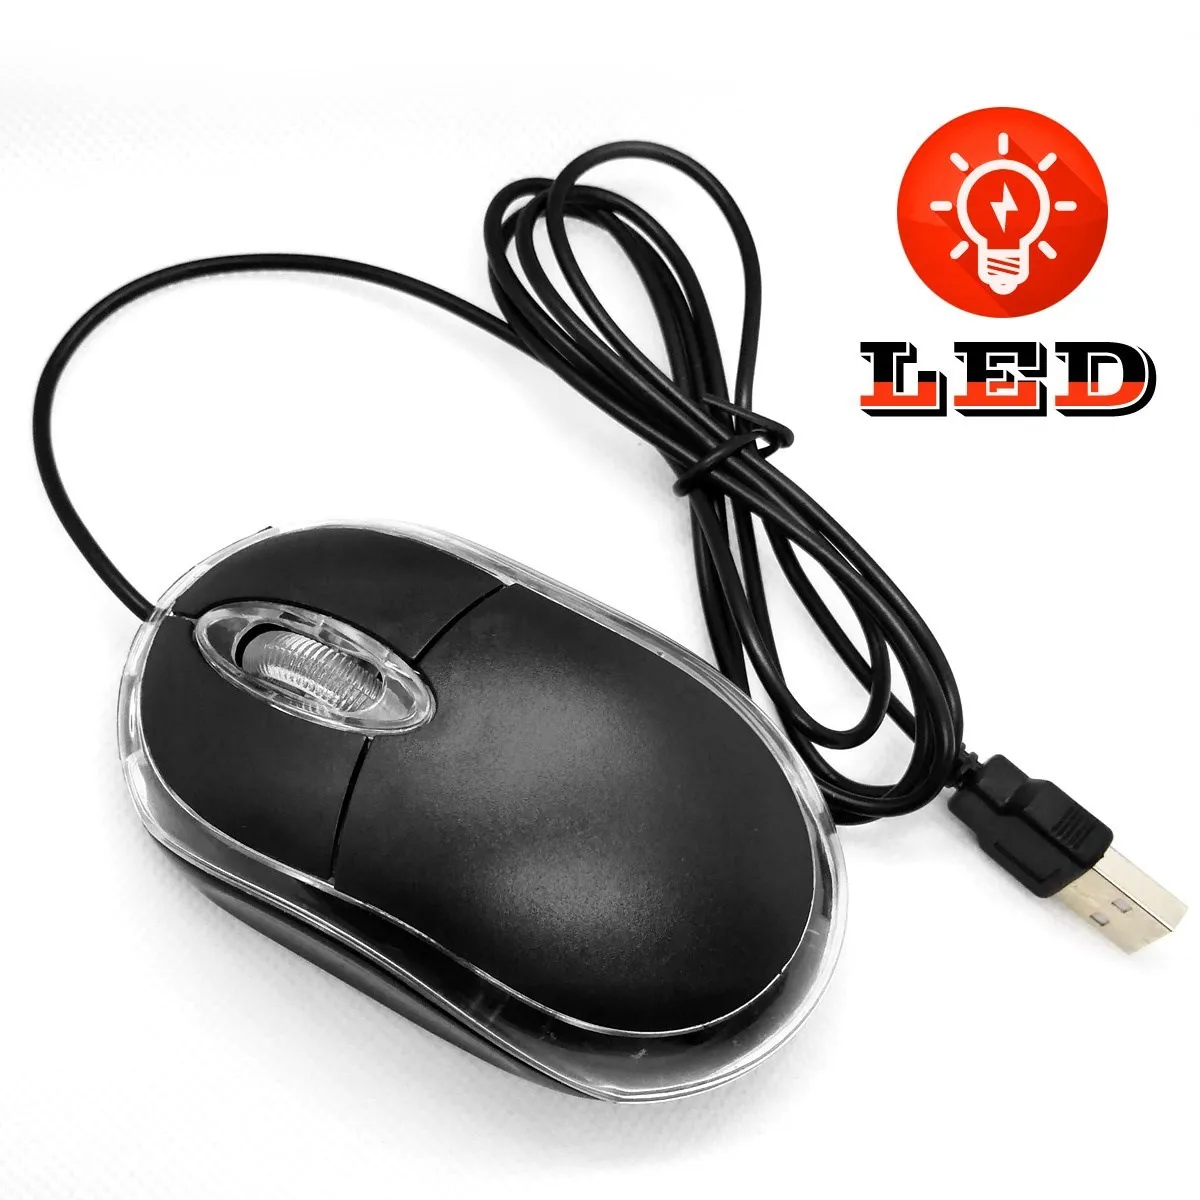 

Mini USB Wired Mouse For Computer Laptops Portable Business Home Office Gaming Mouse USB 1000DPI Optical LED 2 Buttons Game Mice